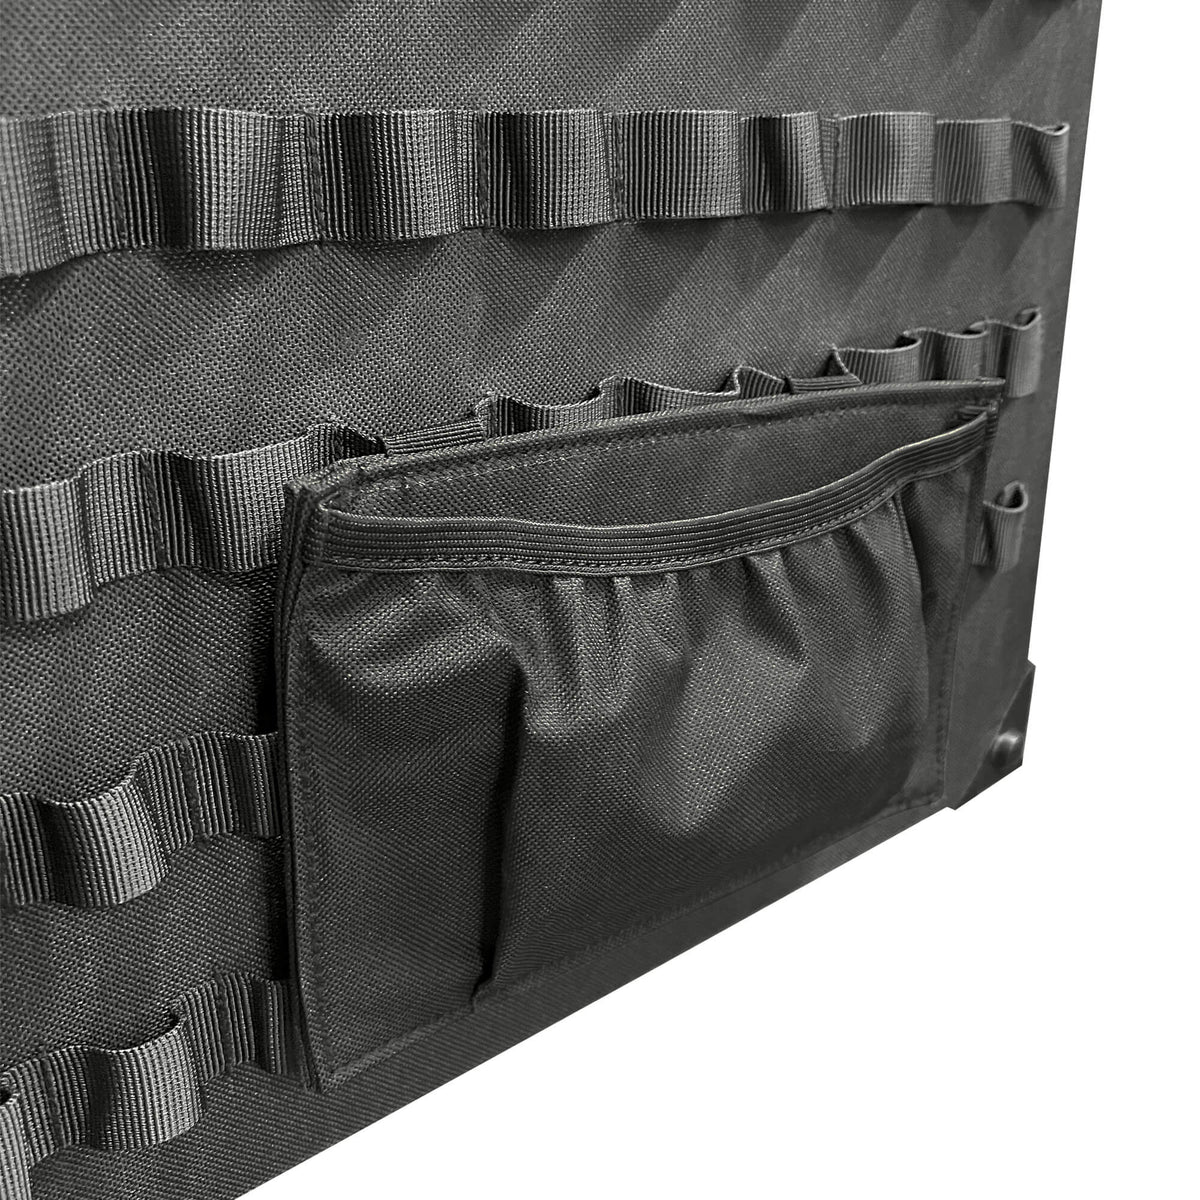 Stealth Molle Rifle Holster Bottom Piece on Safe